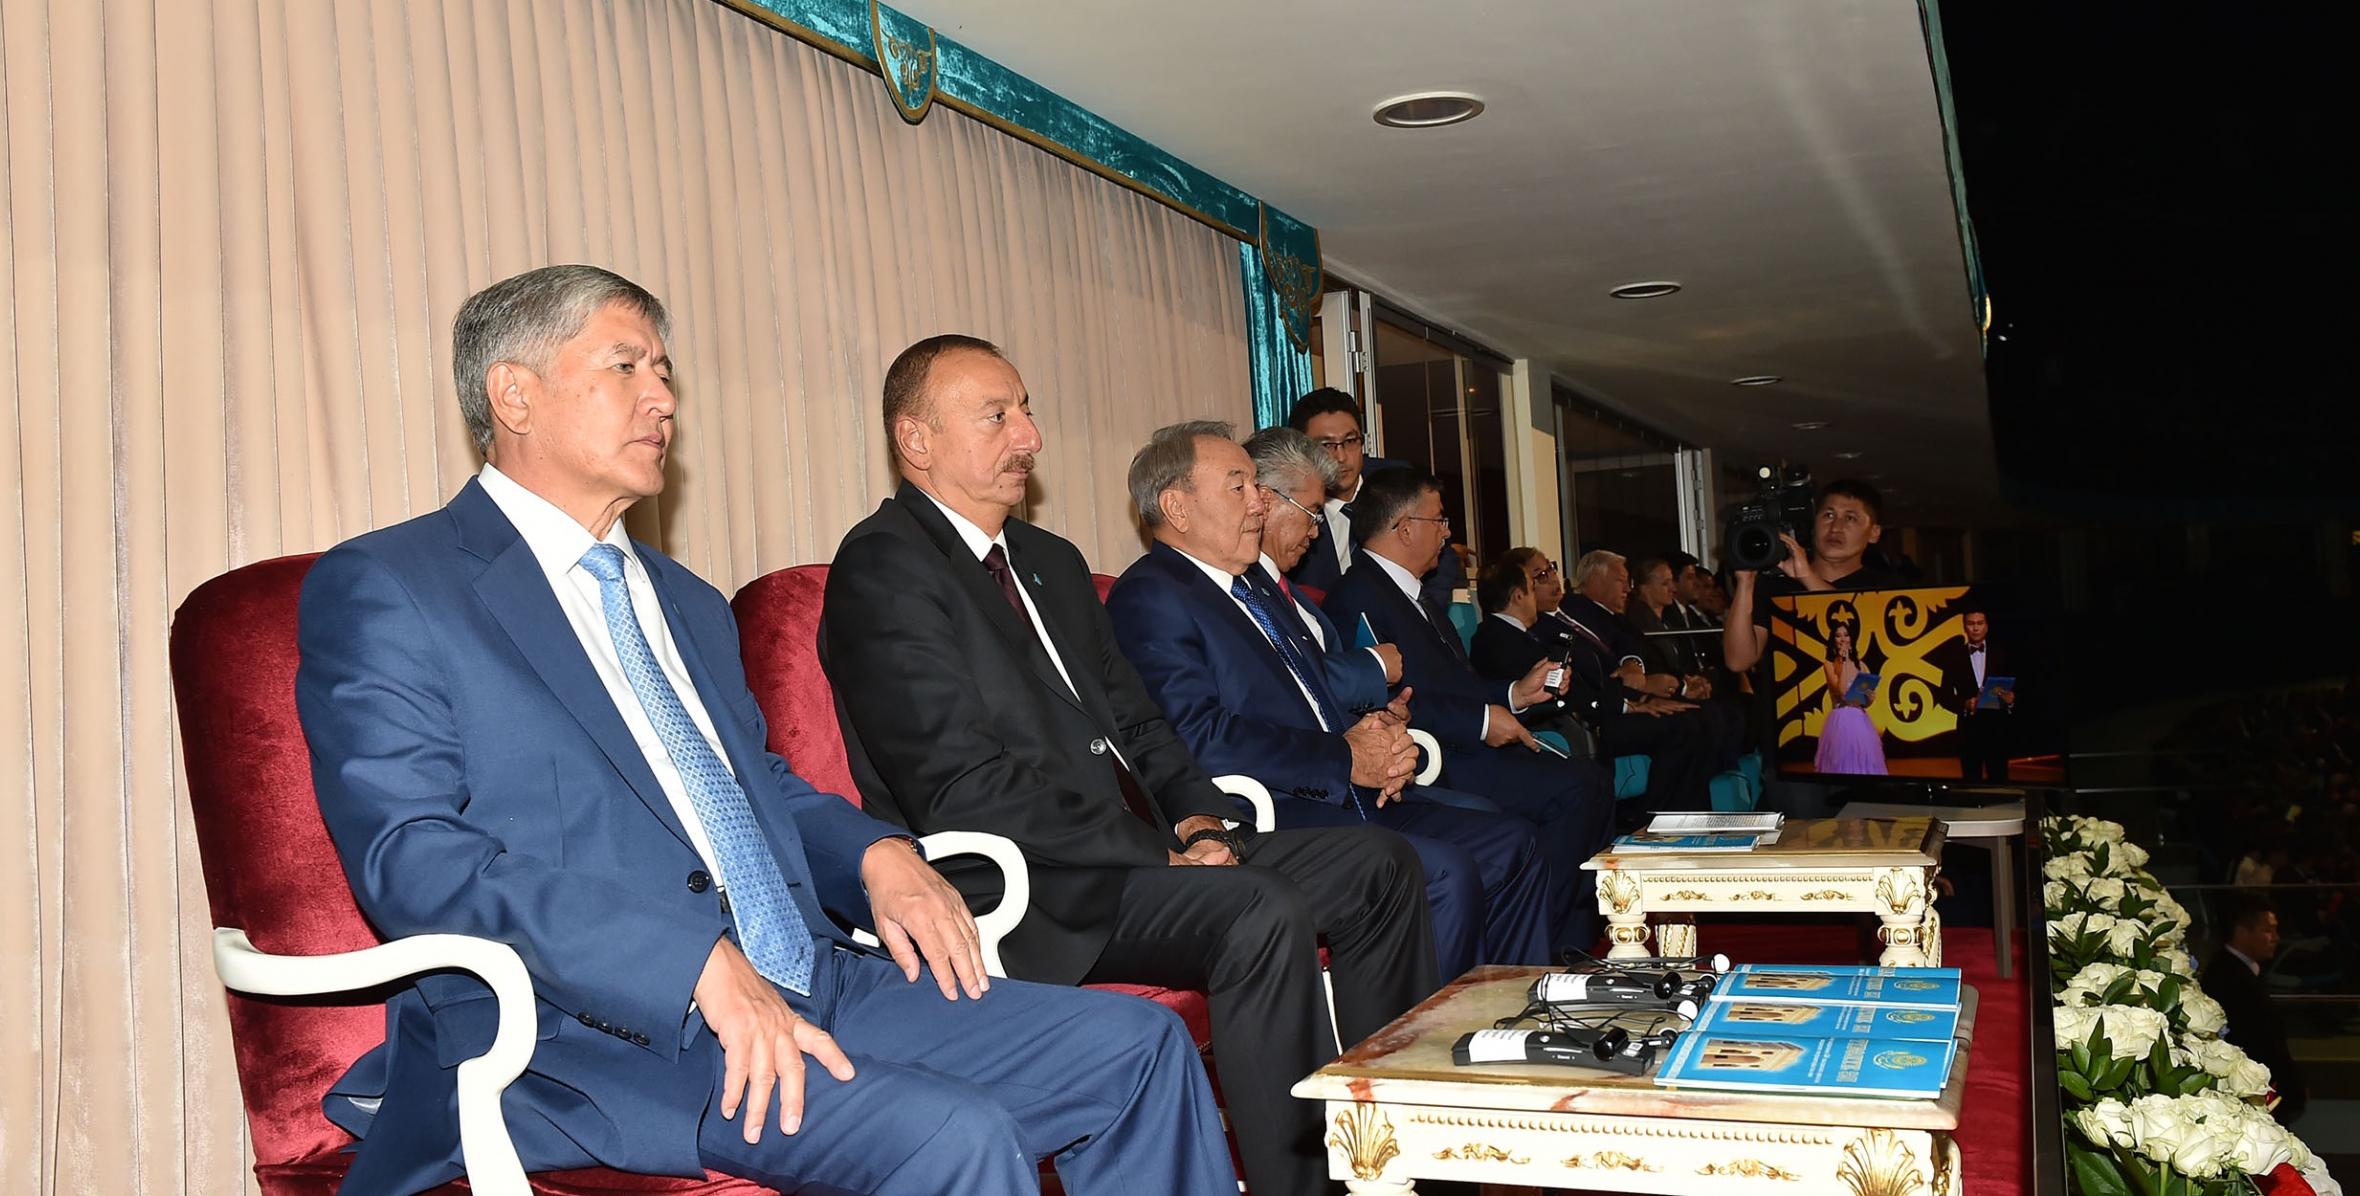 Ilham Aliyev watched a theatrical performance on the 550th anniversary of Kazakh Khanate